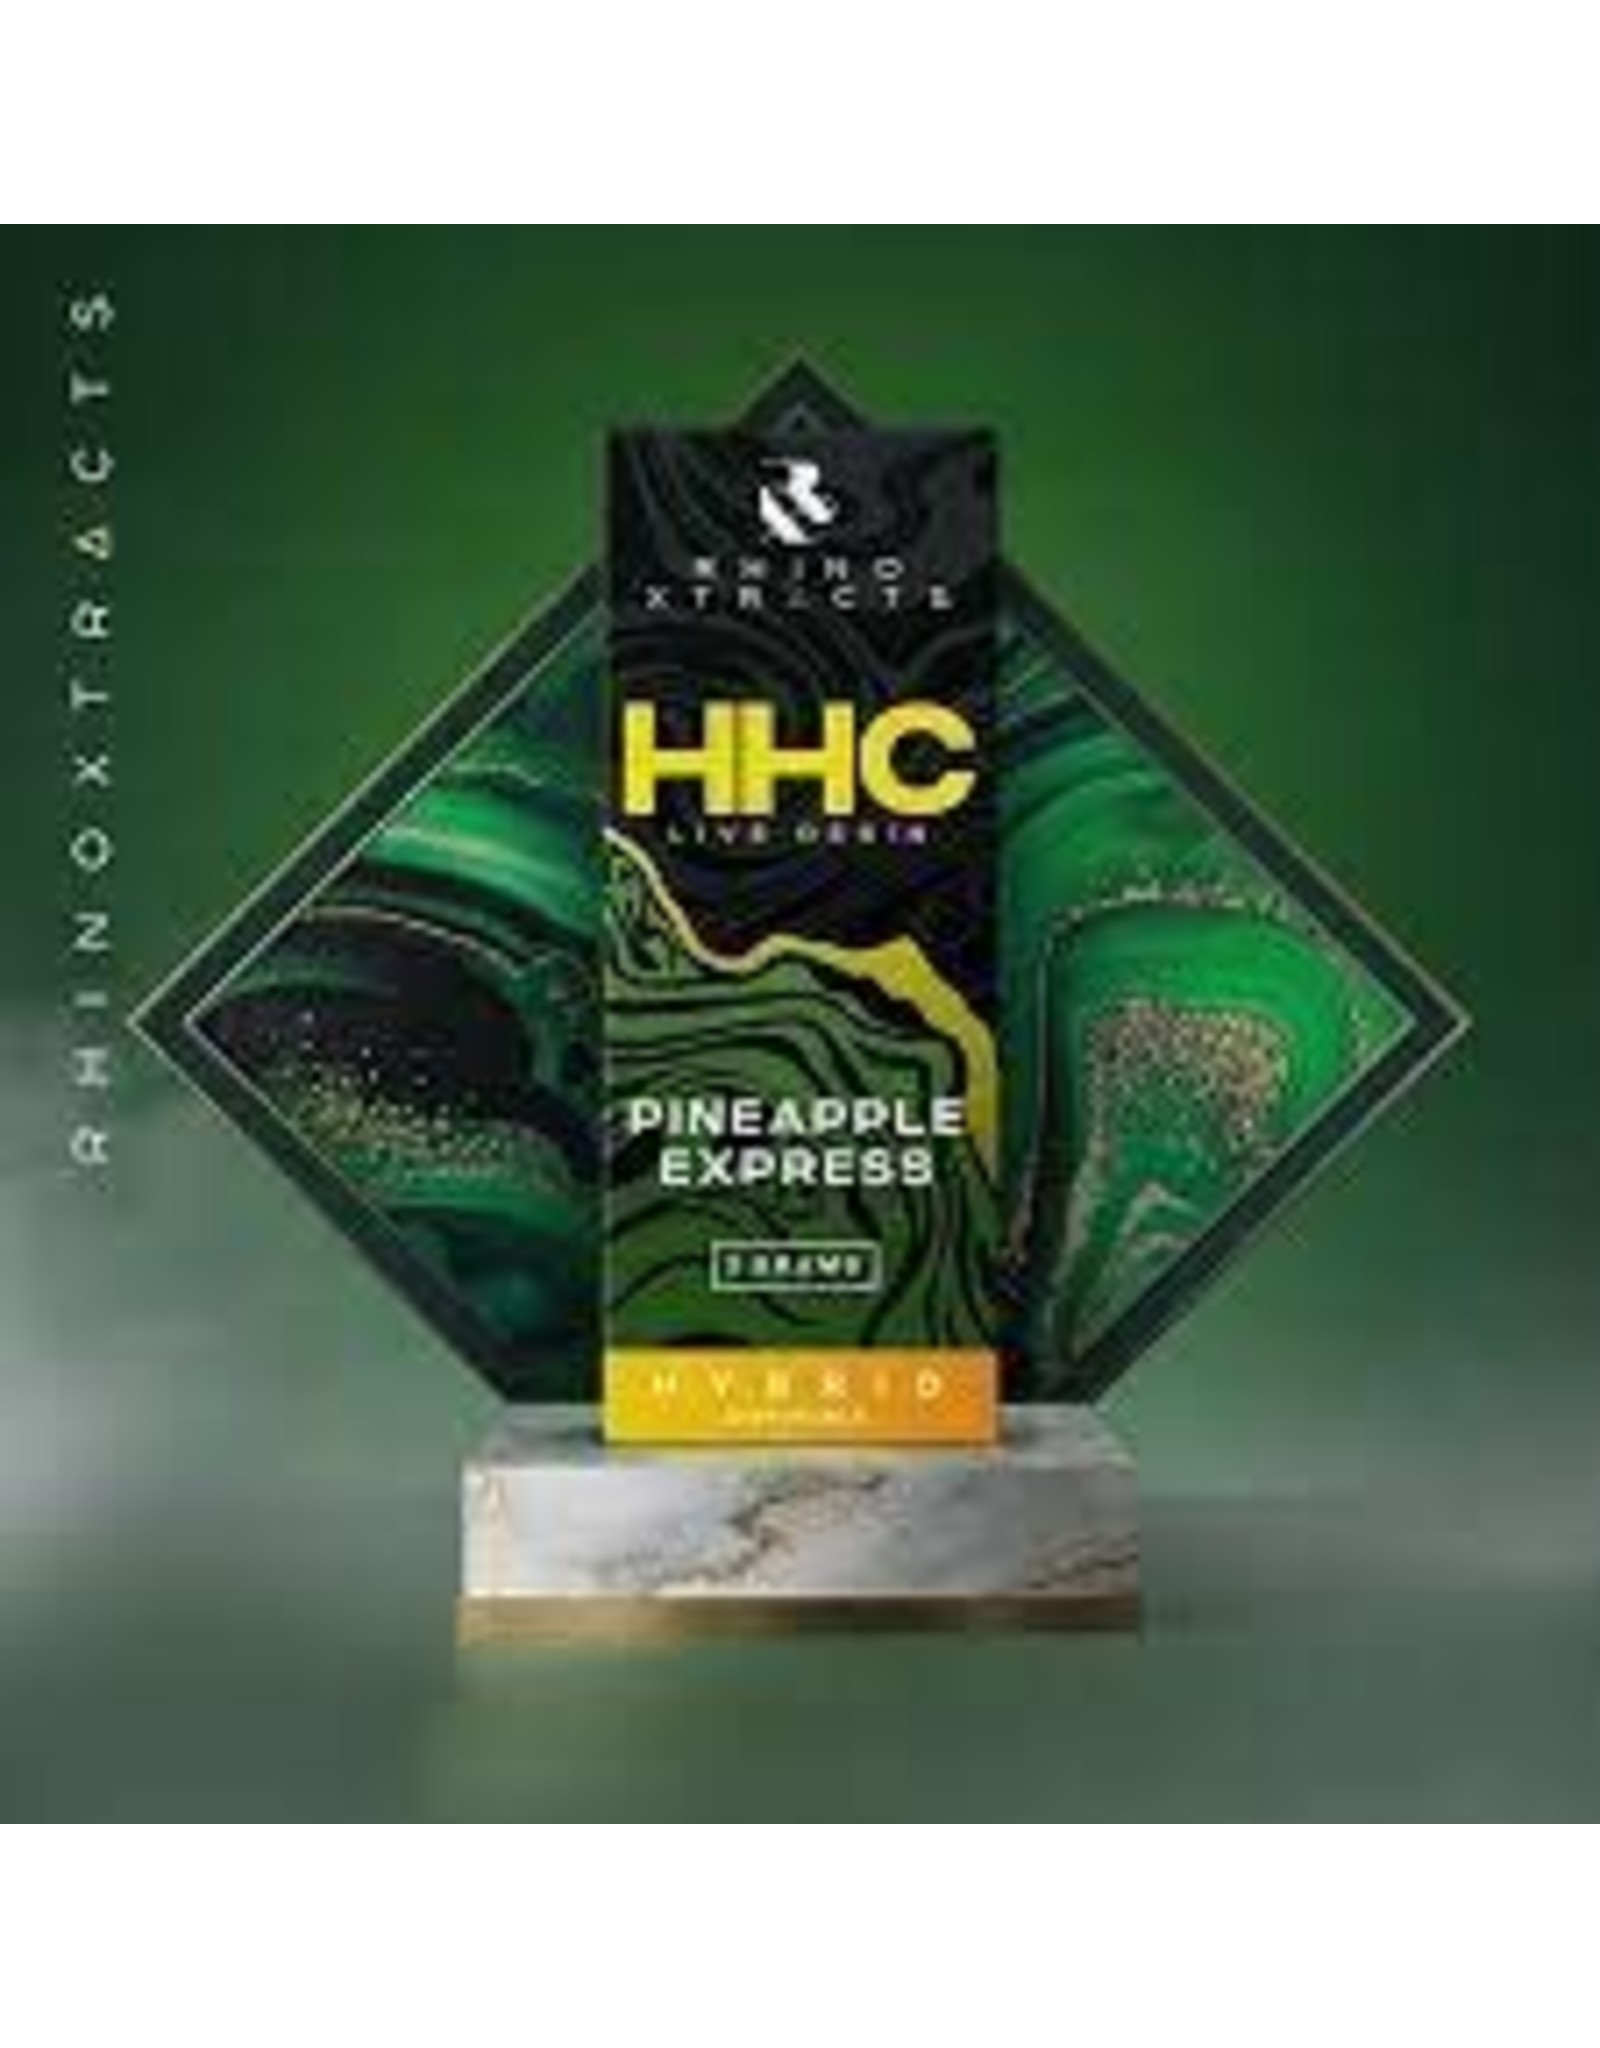 Rhino Xtracts Rhino Xtracts Pineapple Express HHC Indica 2g Disposable